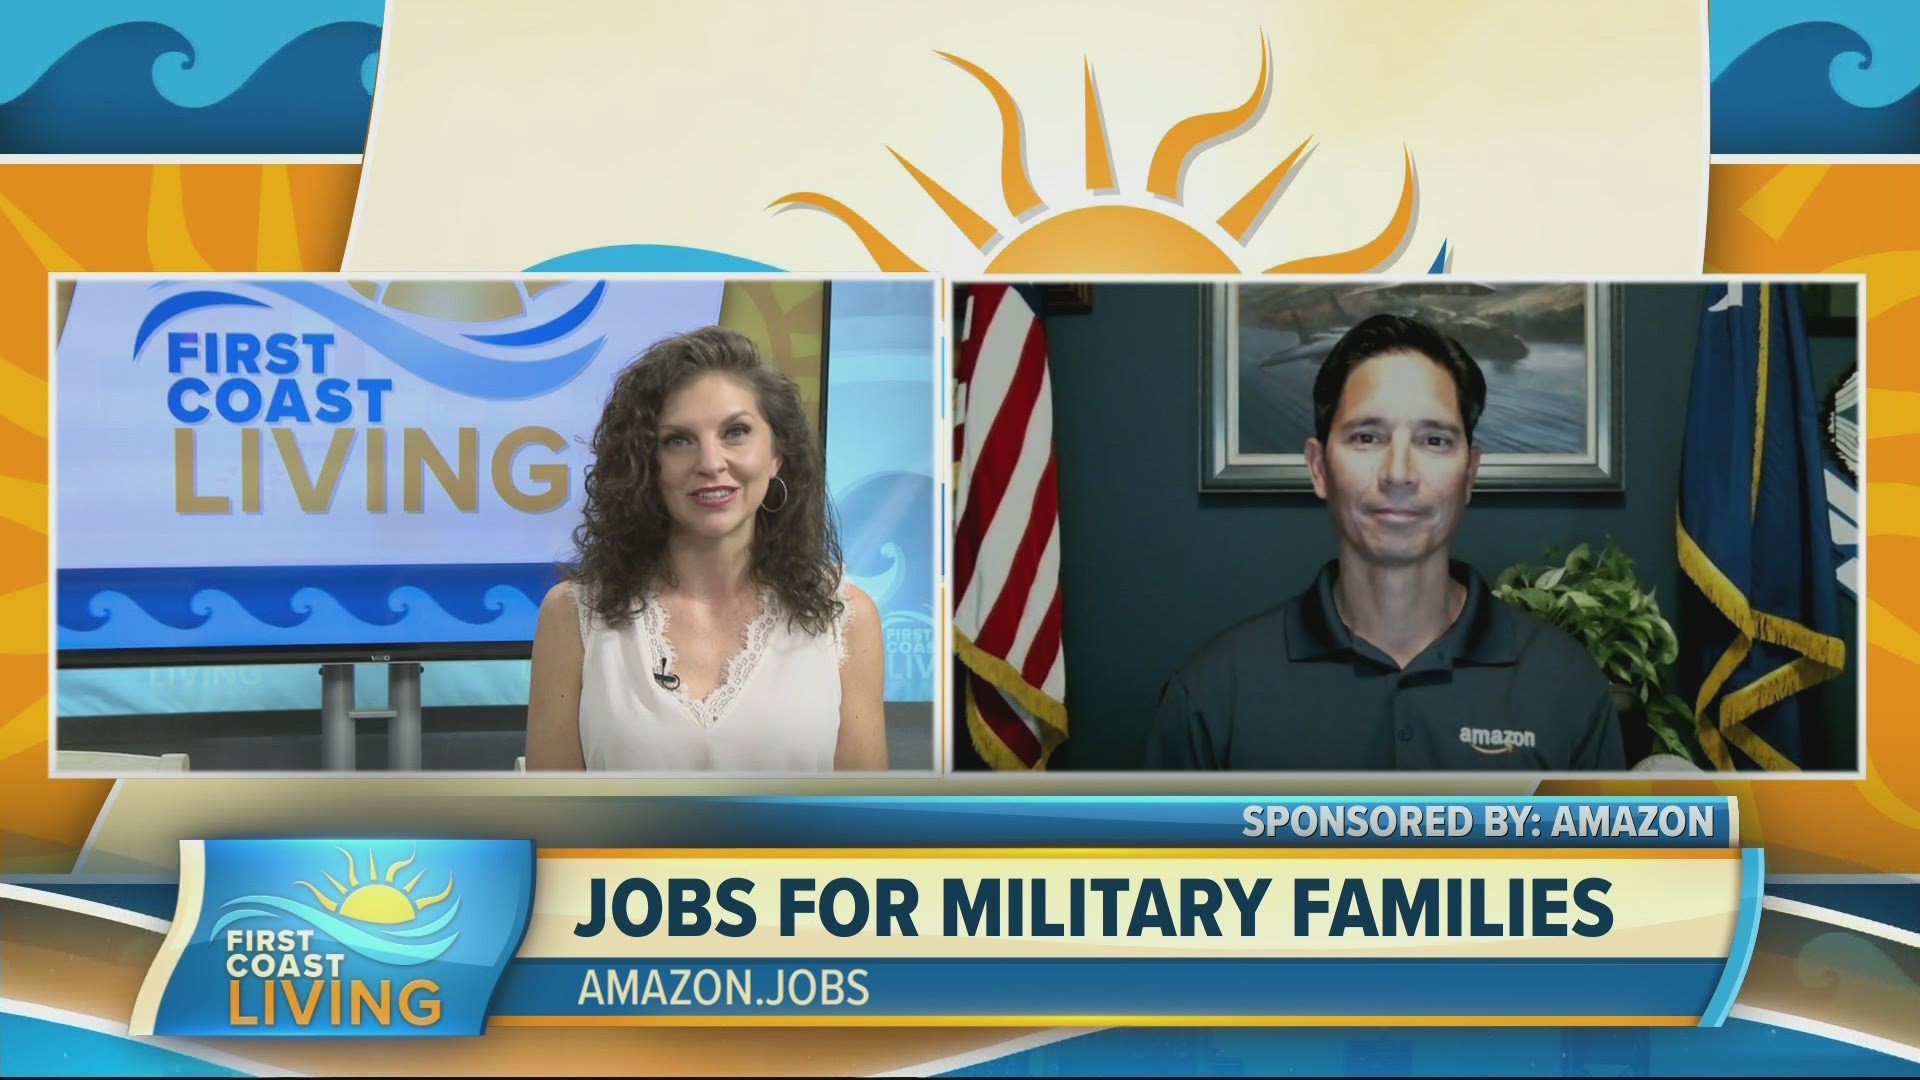 Amazon wants to help veterans transition into rewarding careers with competitive pay and benefits.